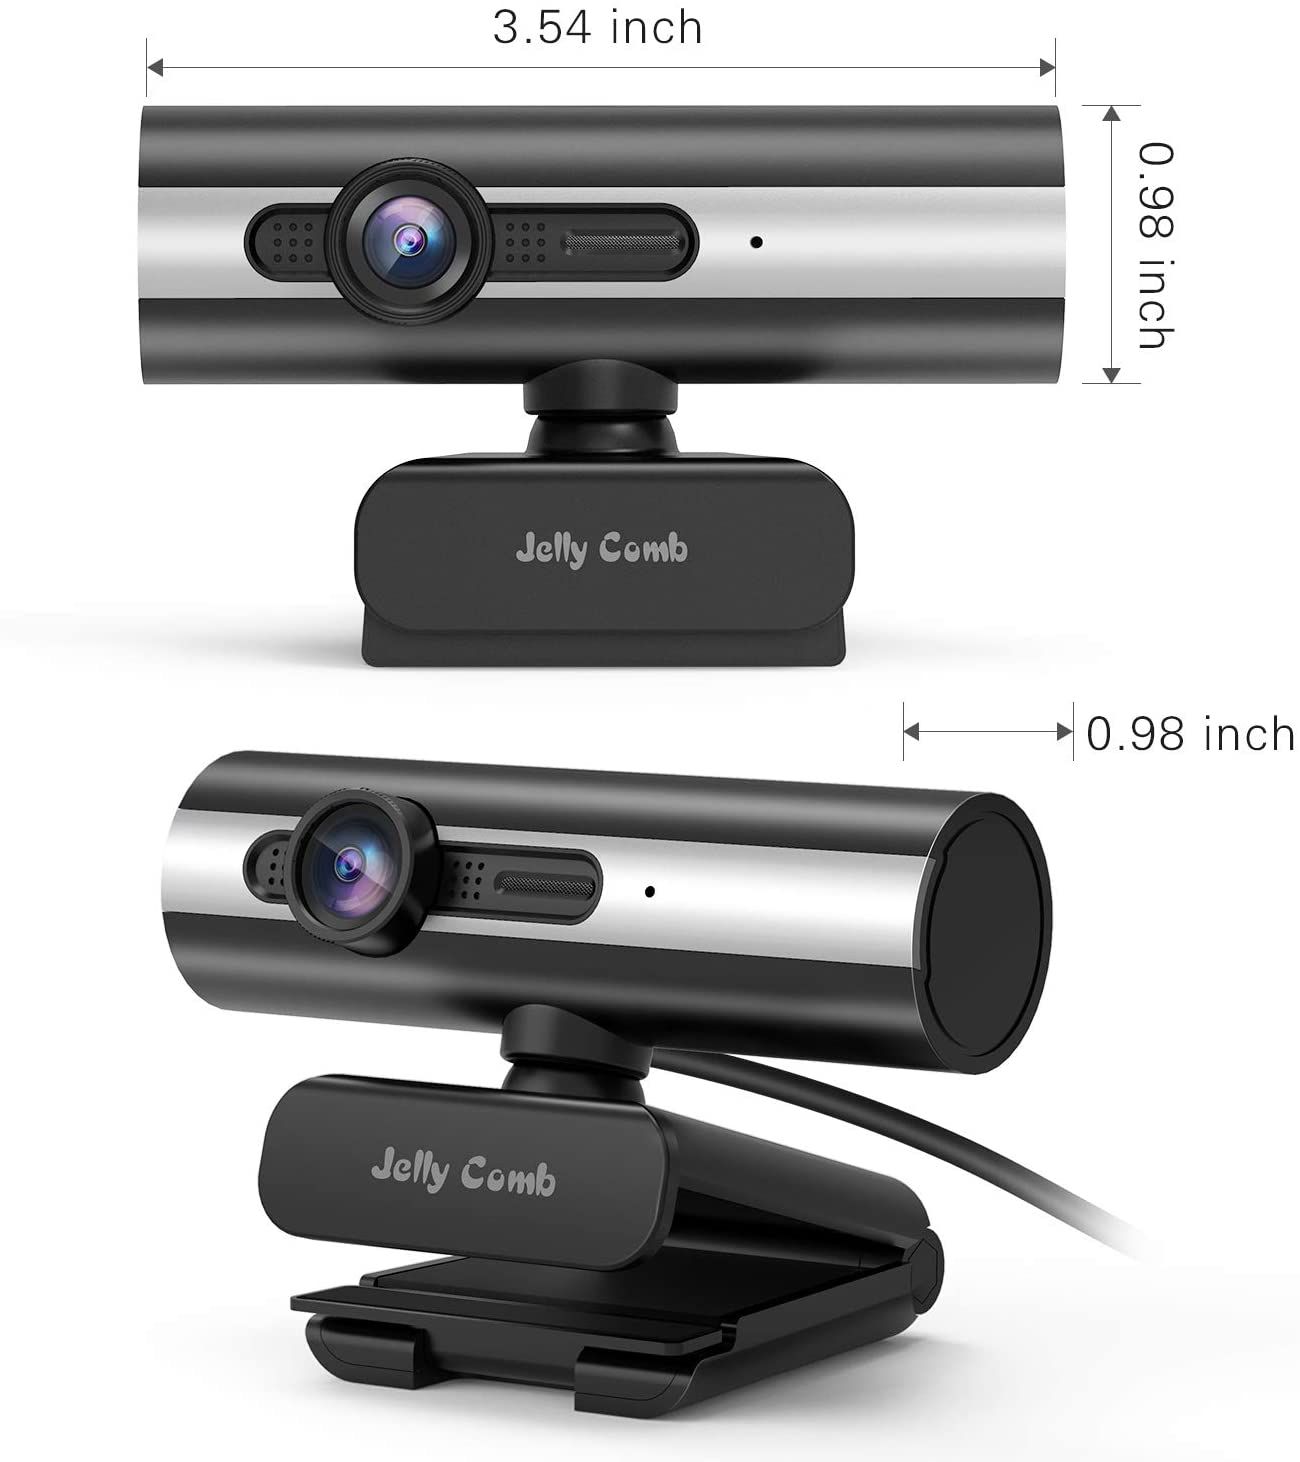 Jelly Comb Webcam dimensions